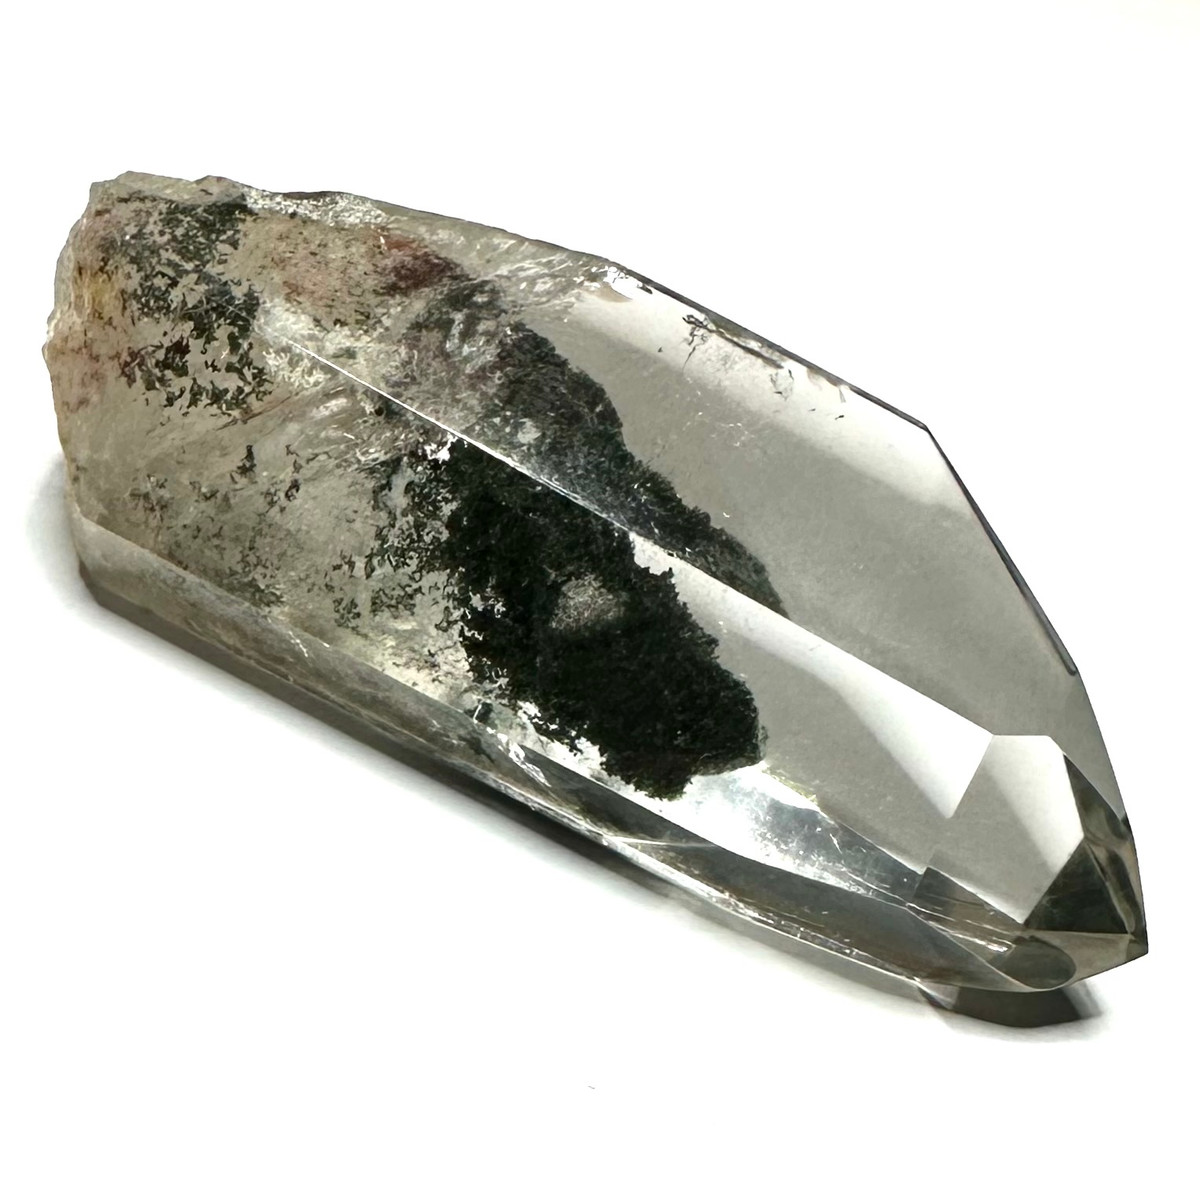 One of a Kind Partially Polished Garden Quartz Terminated Point-2 1/2 x 1"